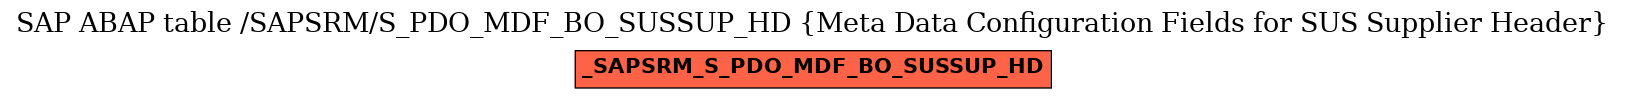 E-R Diagram for table /SAPSRM/S_PDO_MDF_BO_SUSSUP_HD (Meta Data Configuration Fields for SUS Supplier Header)